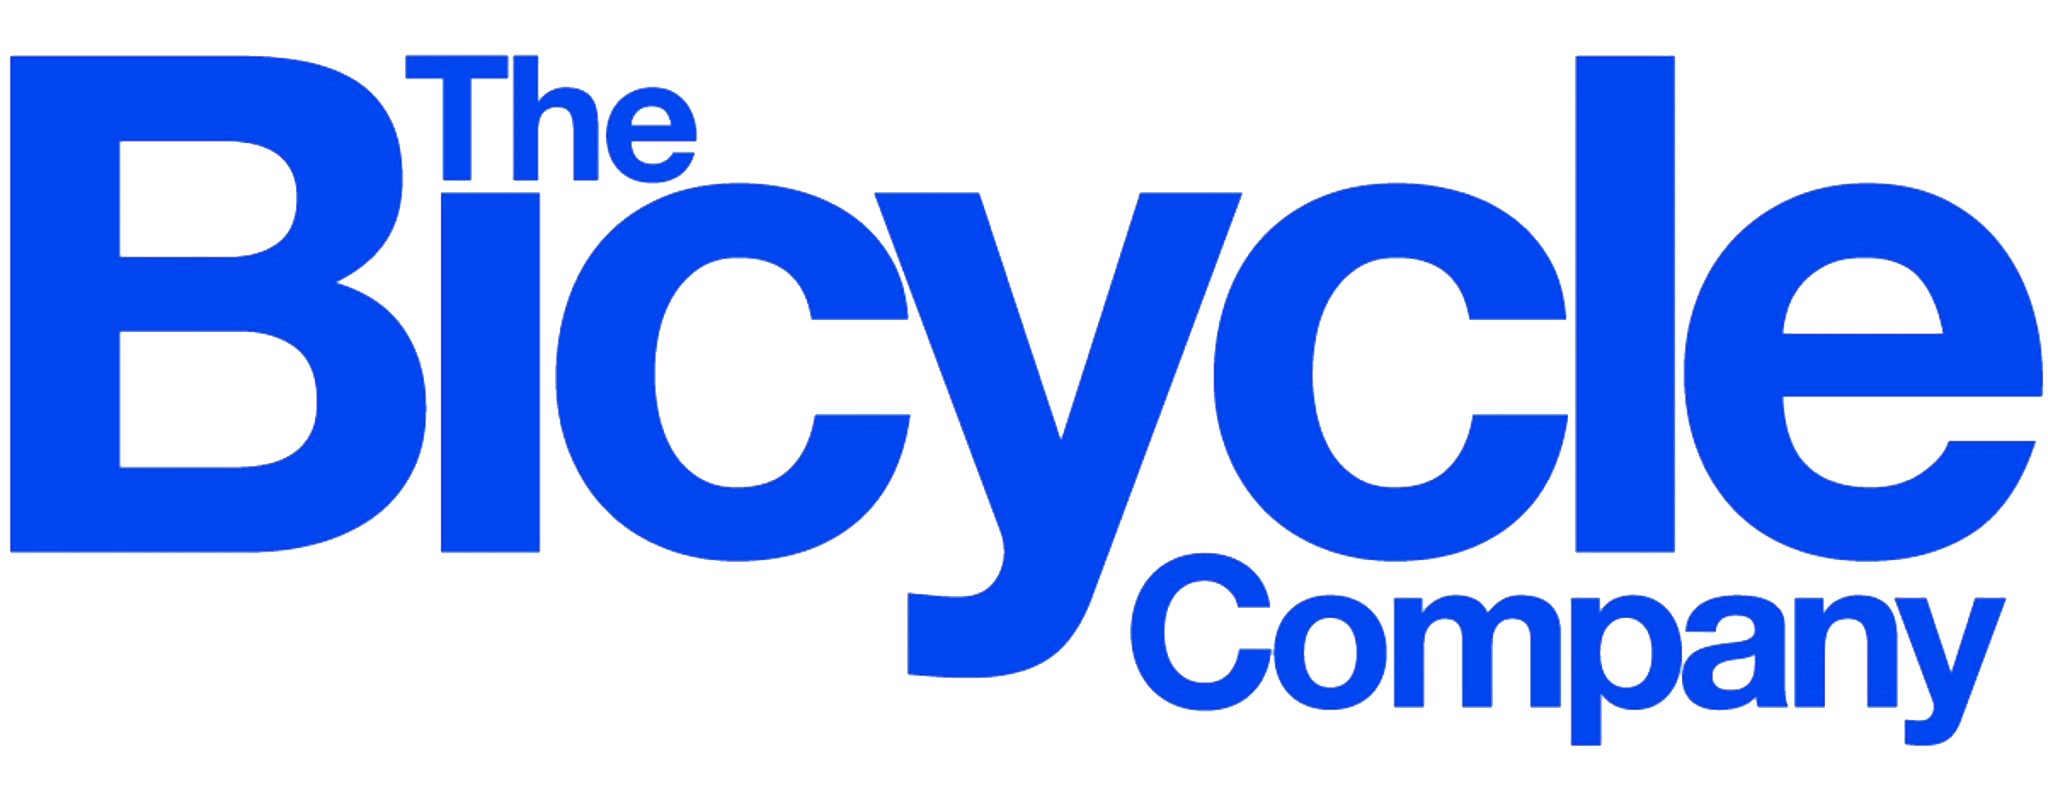 The Bicycle Company